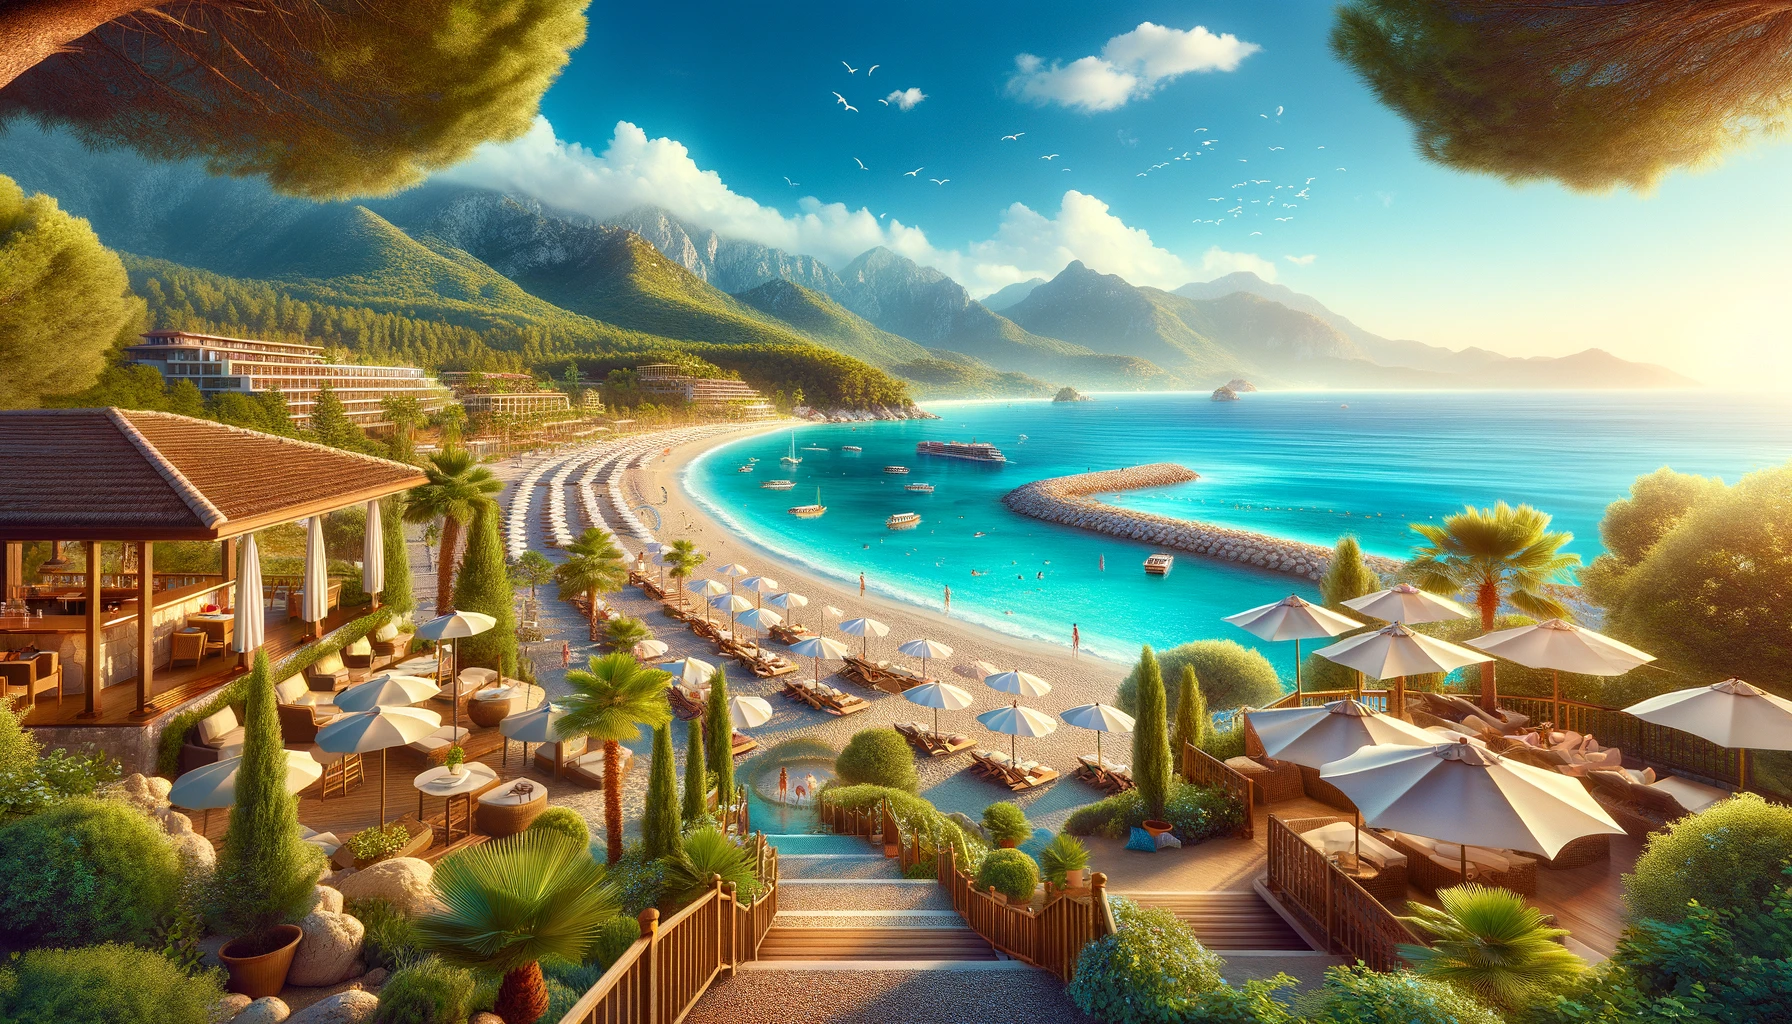 Here is a wide-format image illustrating the breathtaking beauty of the resorts in Turkey, capturing the essence of a luxurious and serene holiday destination.